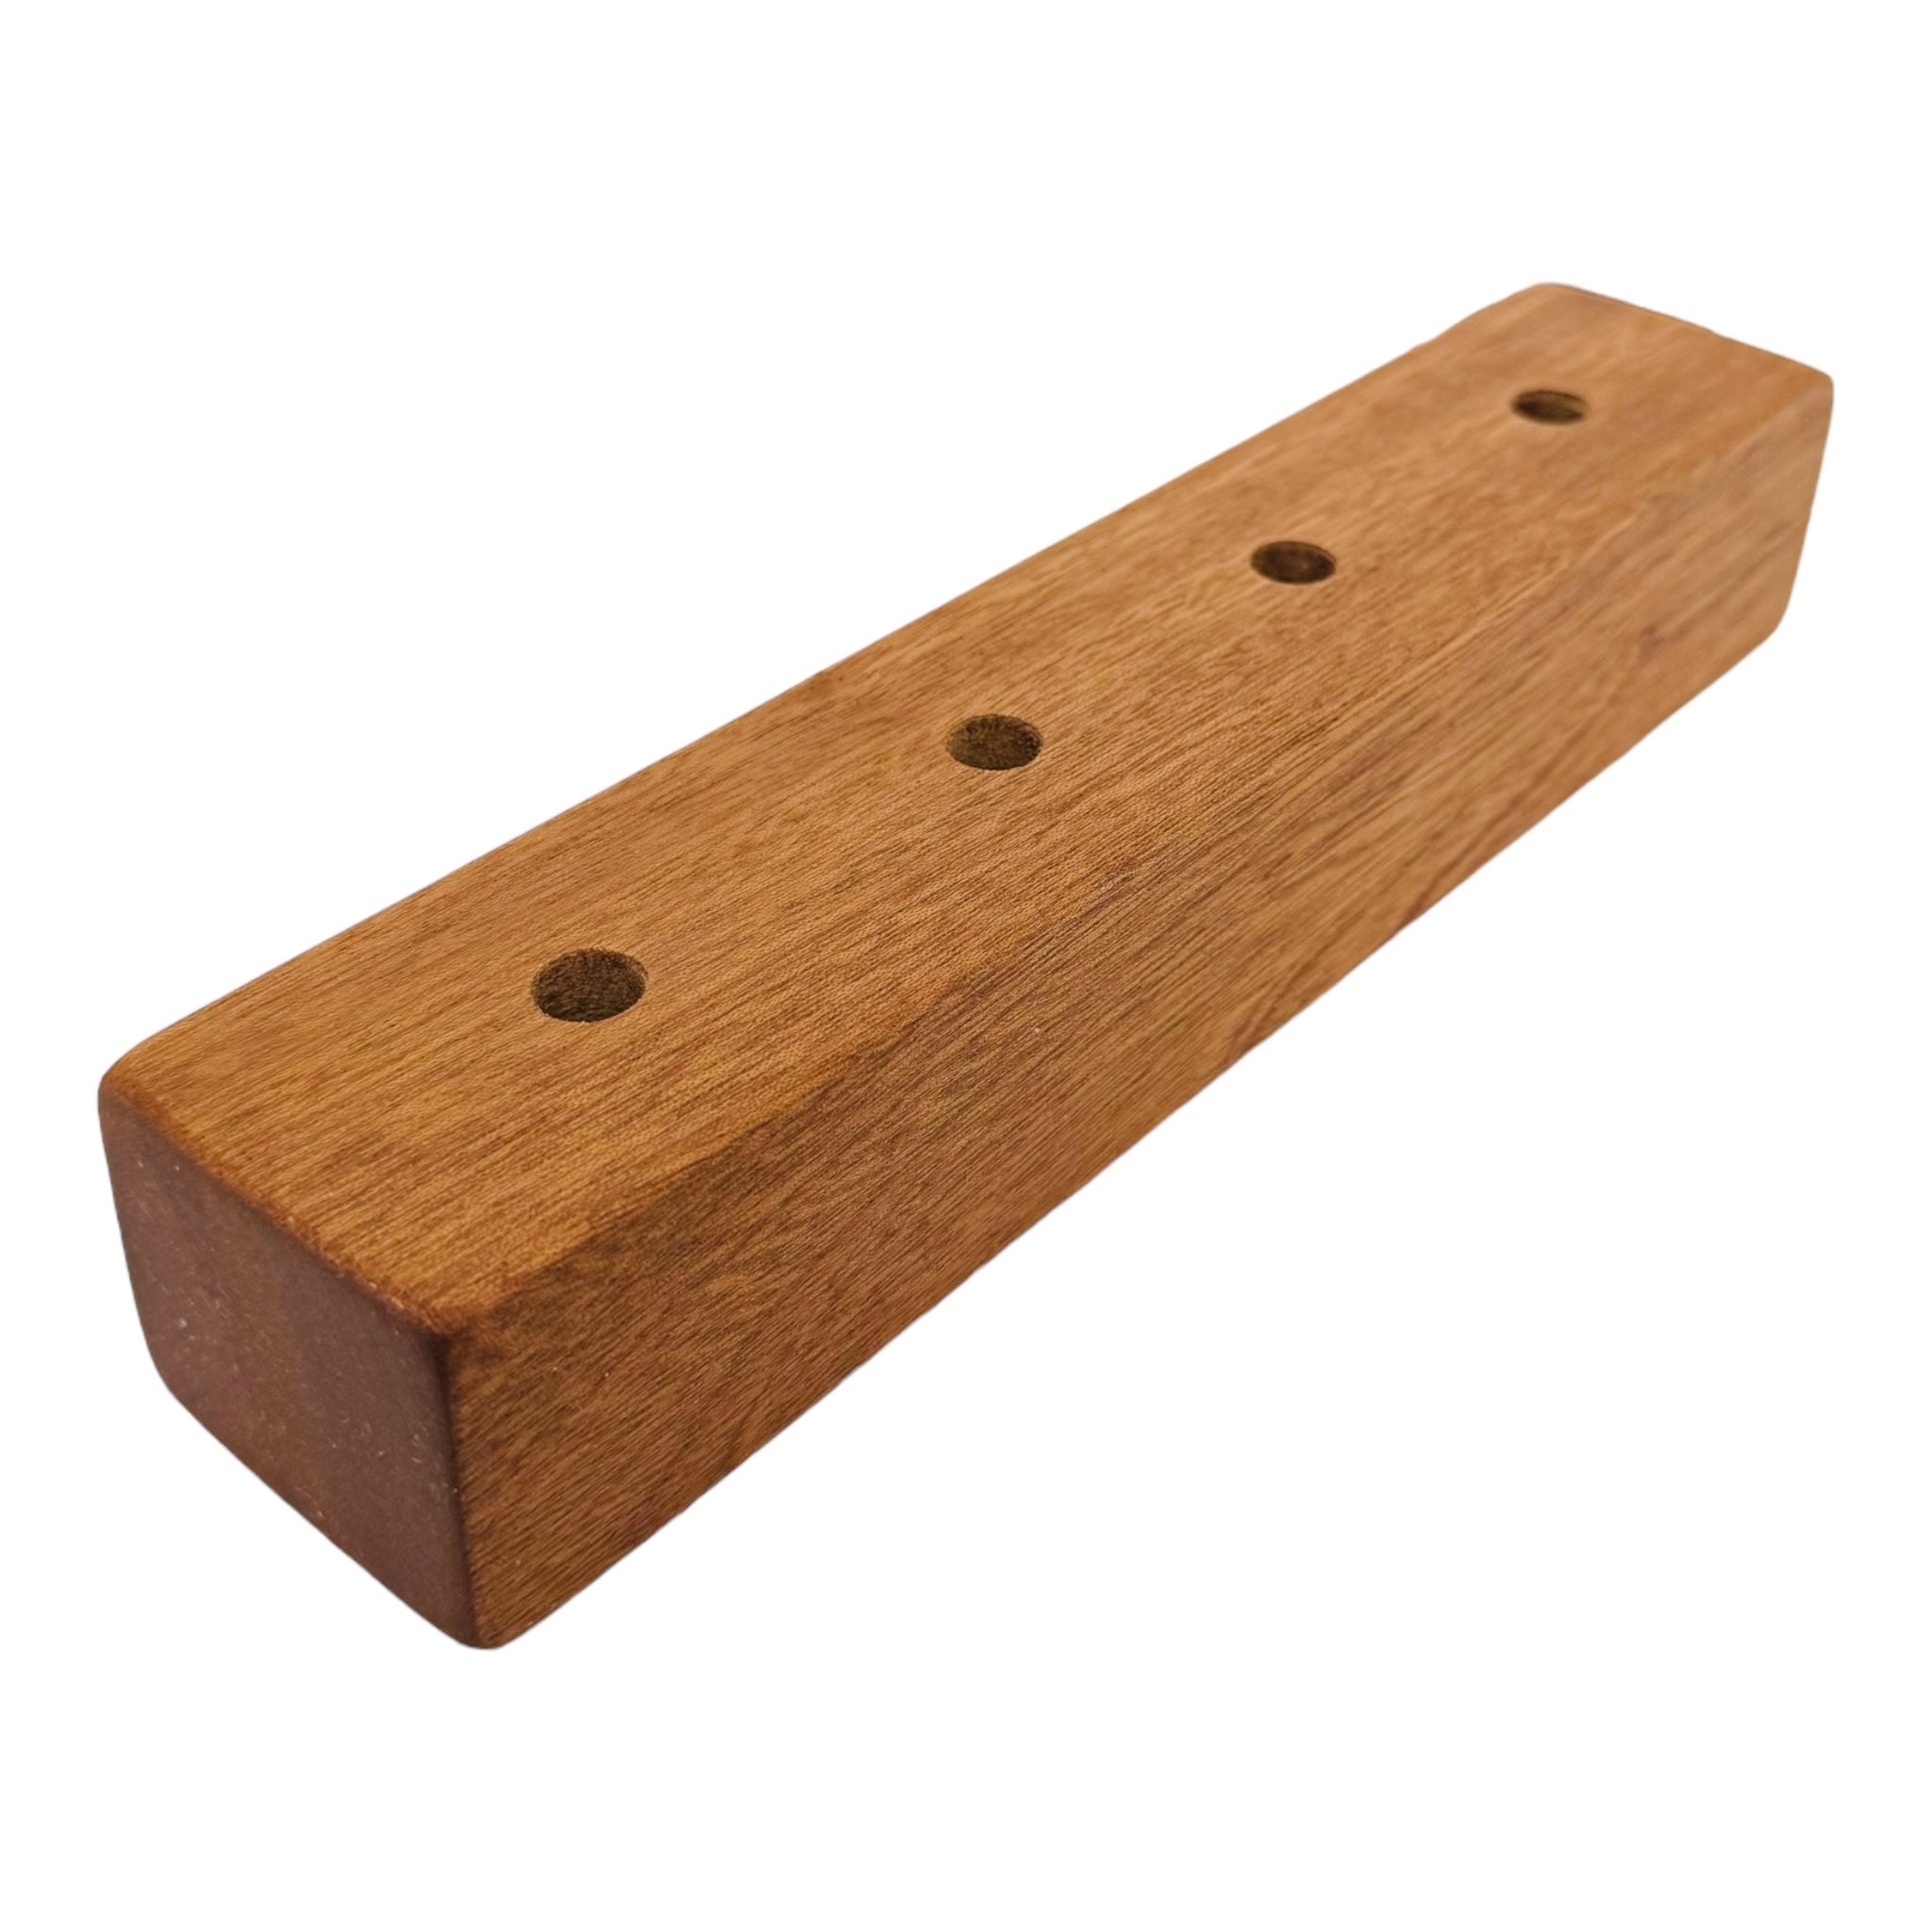 4 Hole Wood Display Stand Holder For 10mm Bong Bowl Pieces Or Quartz Bangers - Mahogany